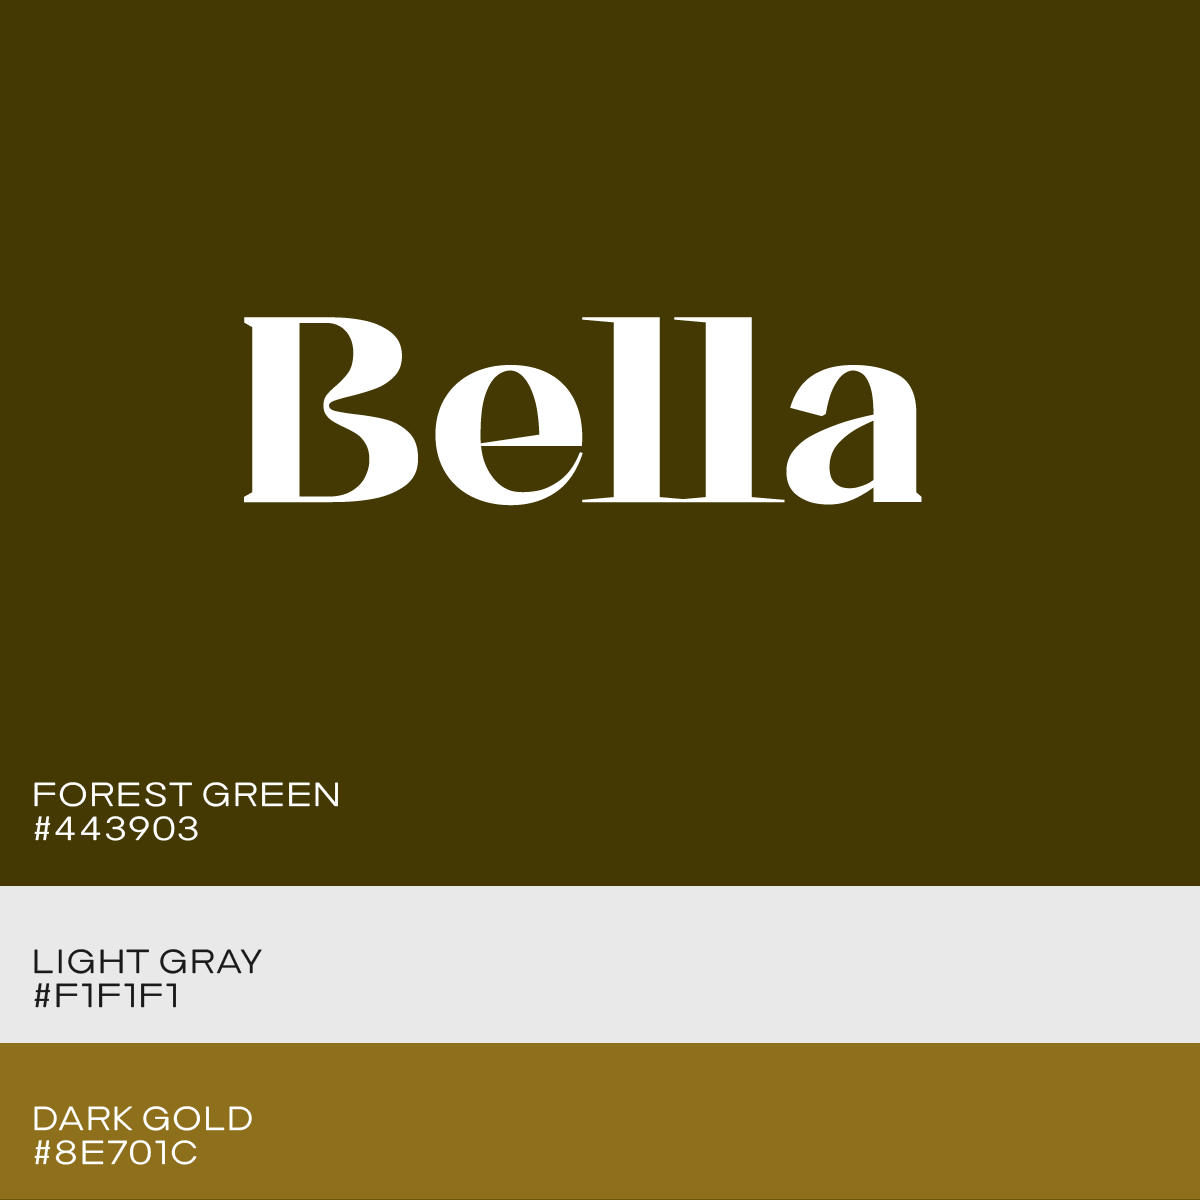 color palette for a jewelry logo